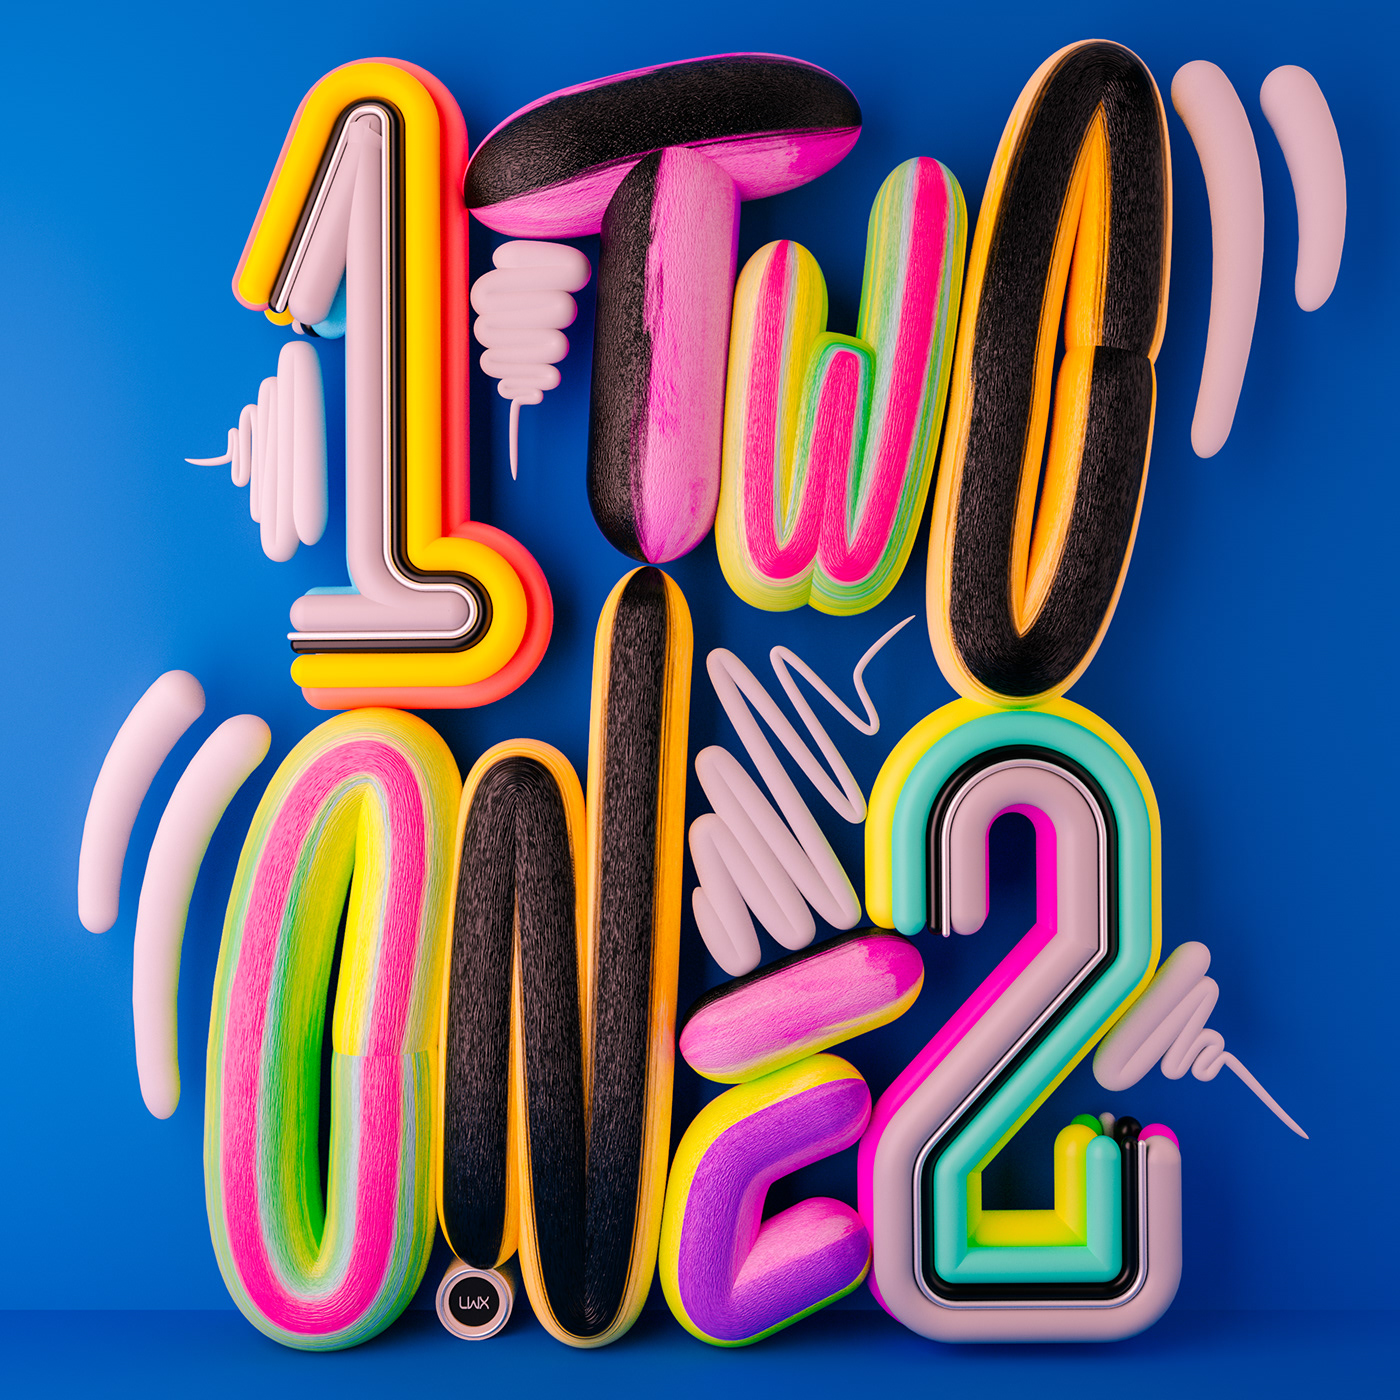 36daysoftype10 3dtypography 3Dillustration colorful acrylic watercolor 3dlettering